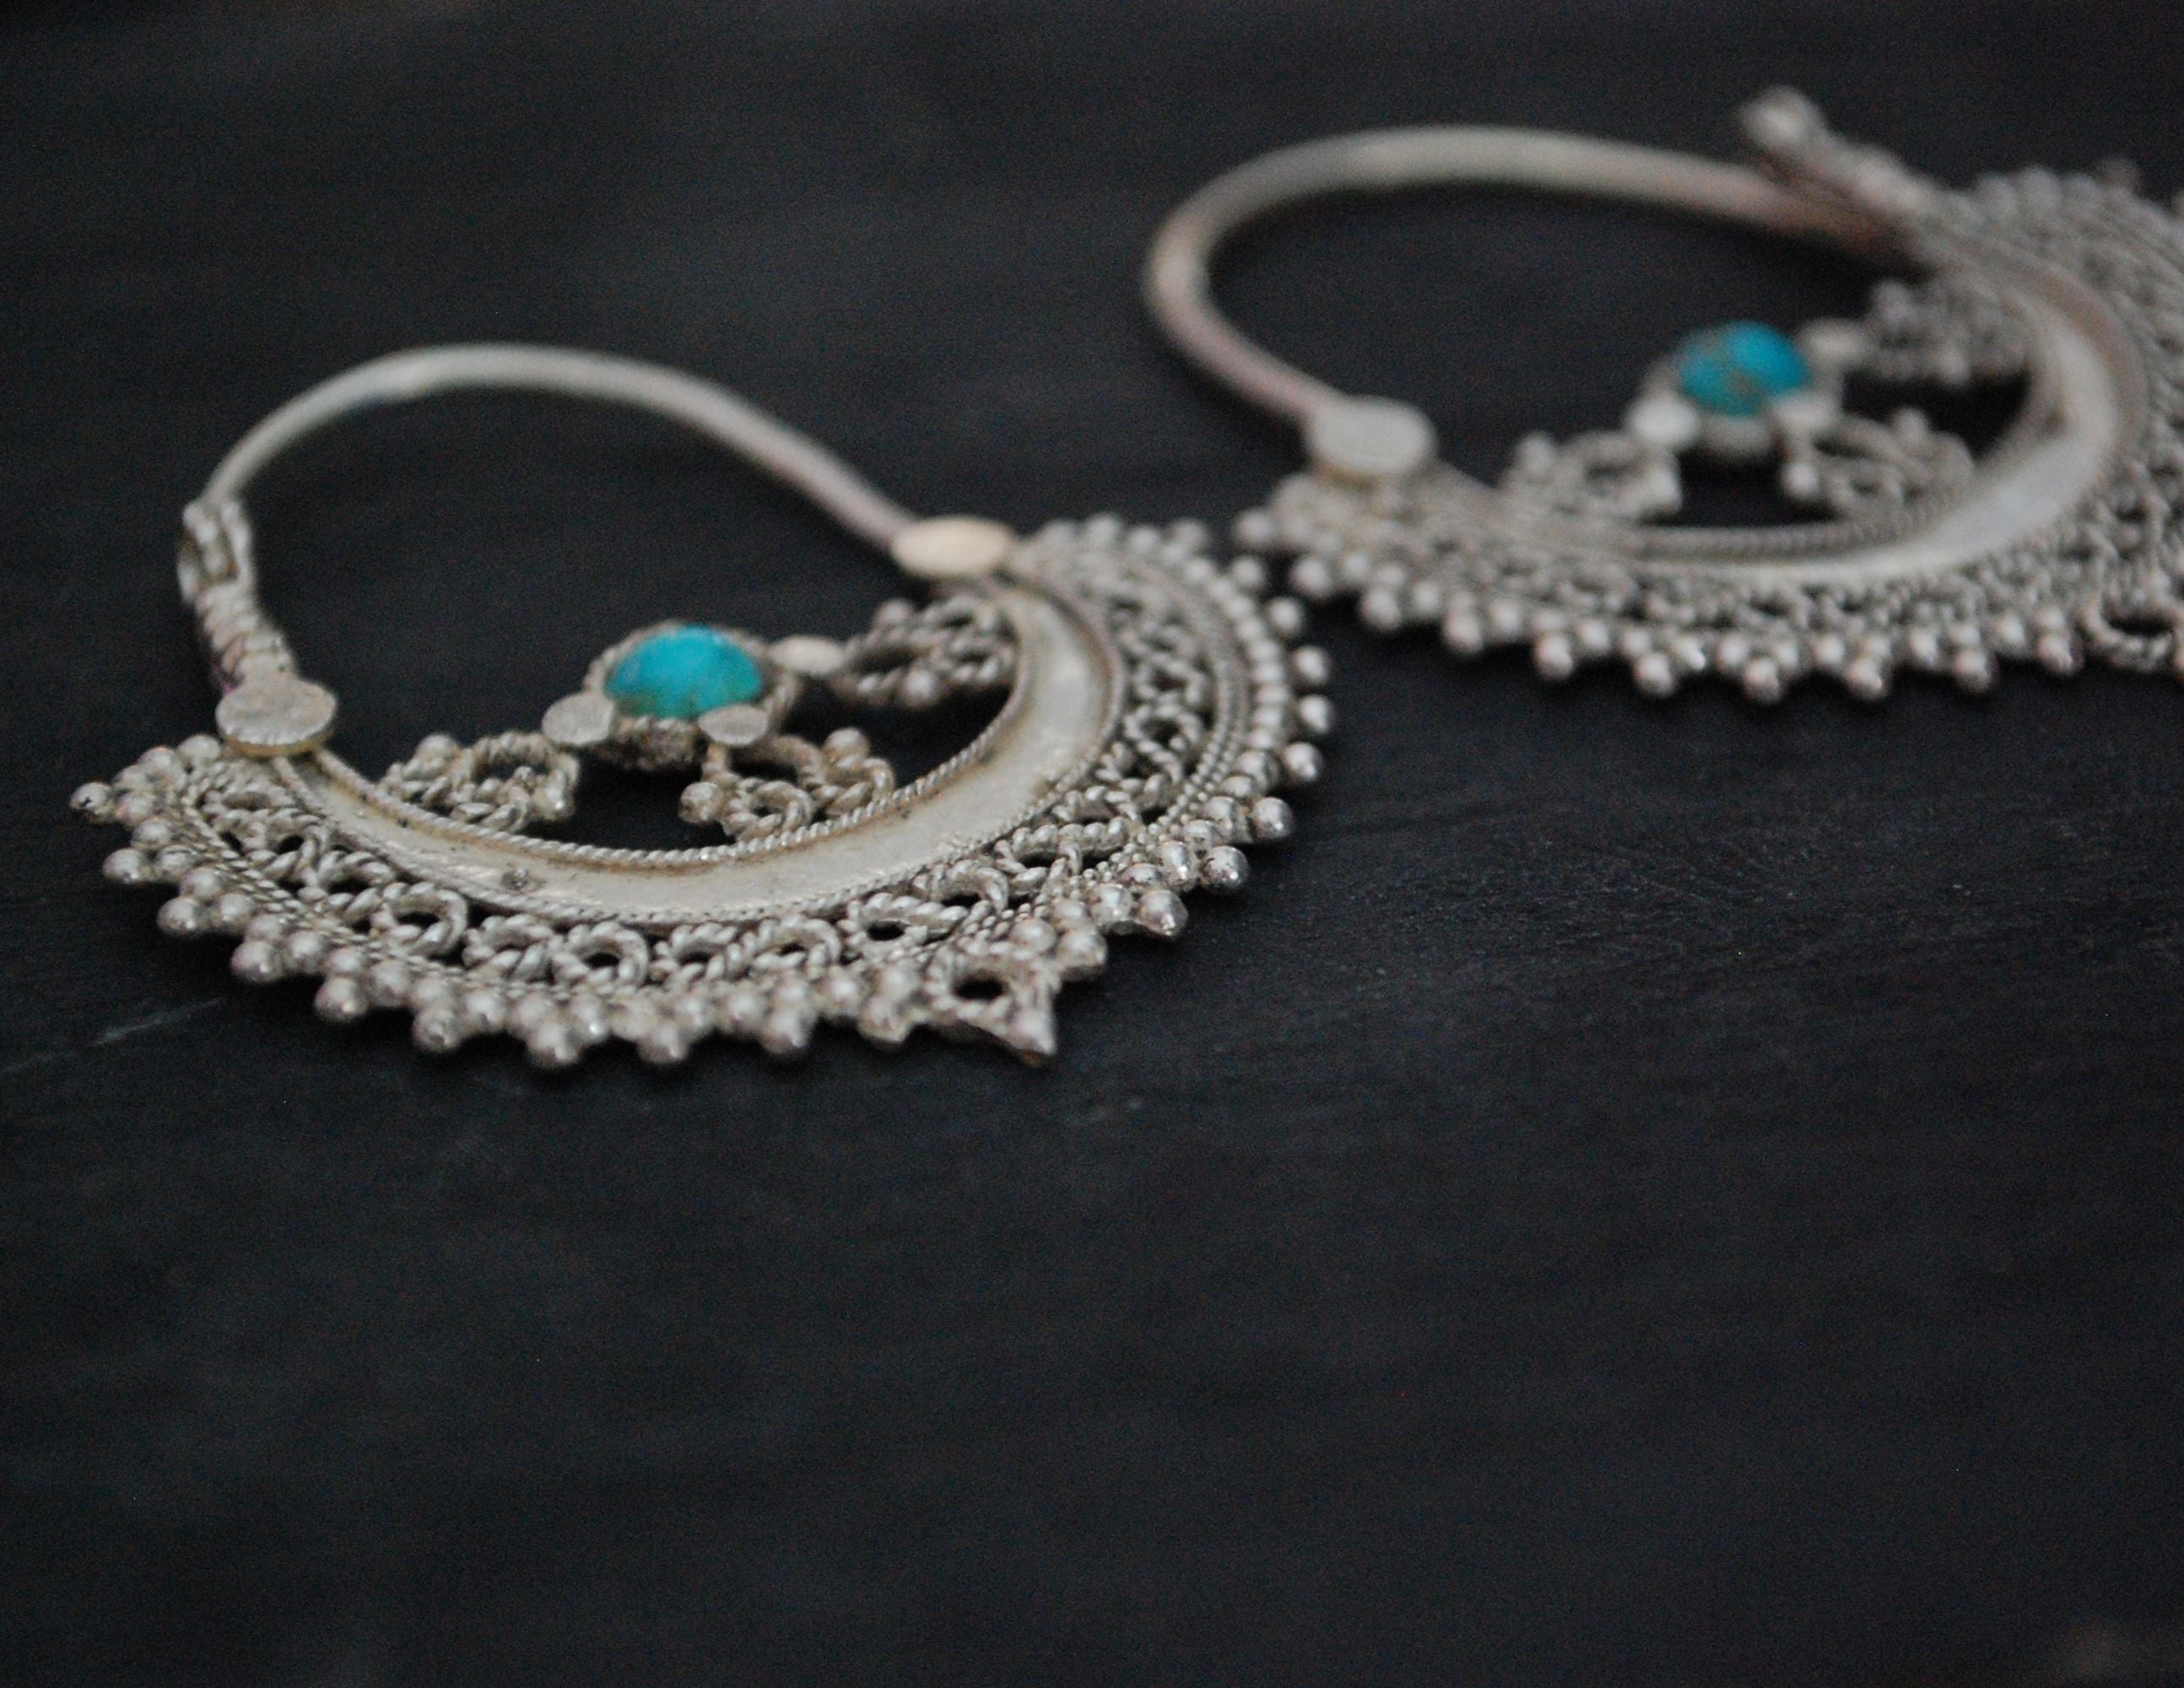 Antique Afghani Hoop Earrings with Turquoise